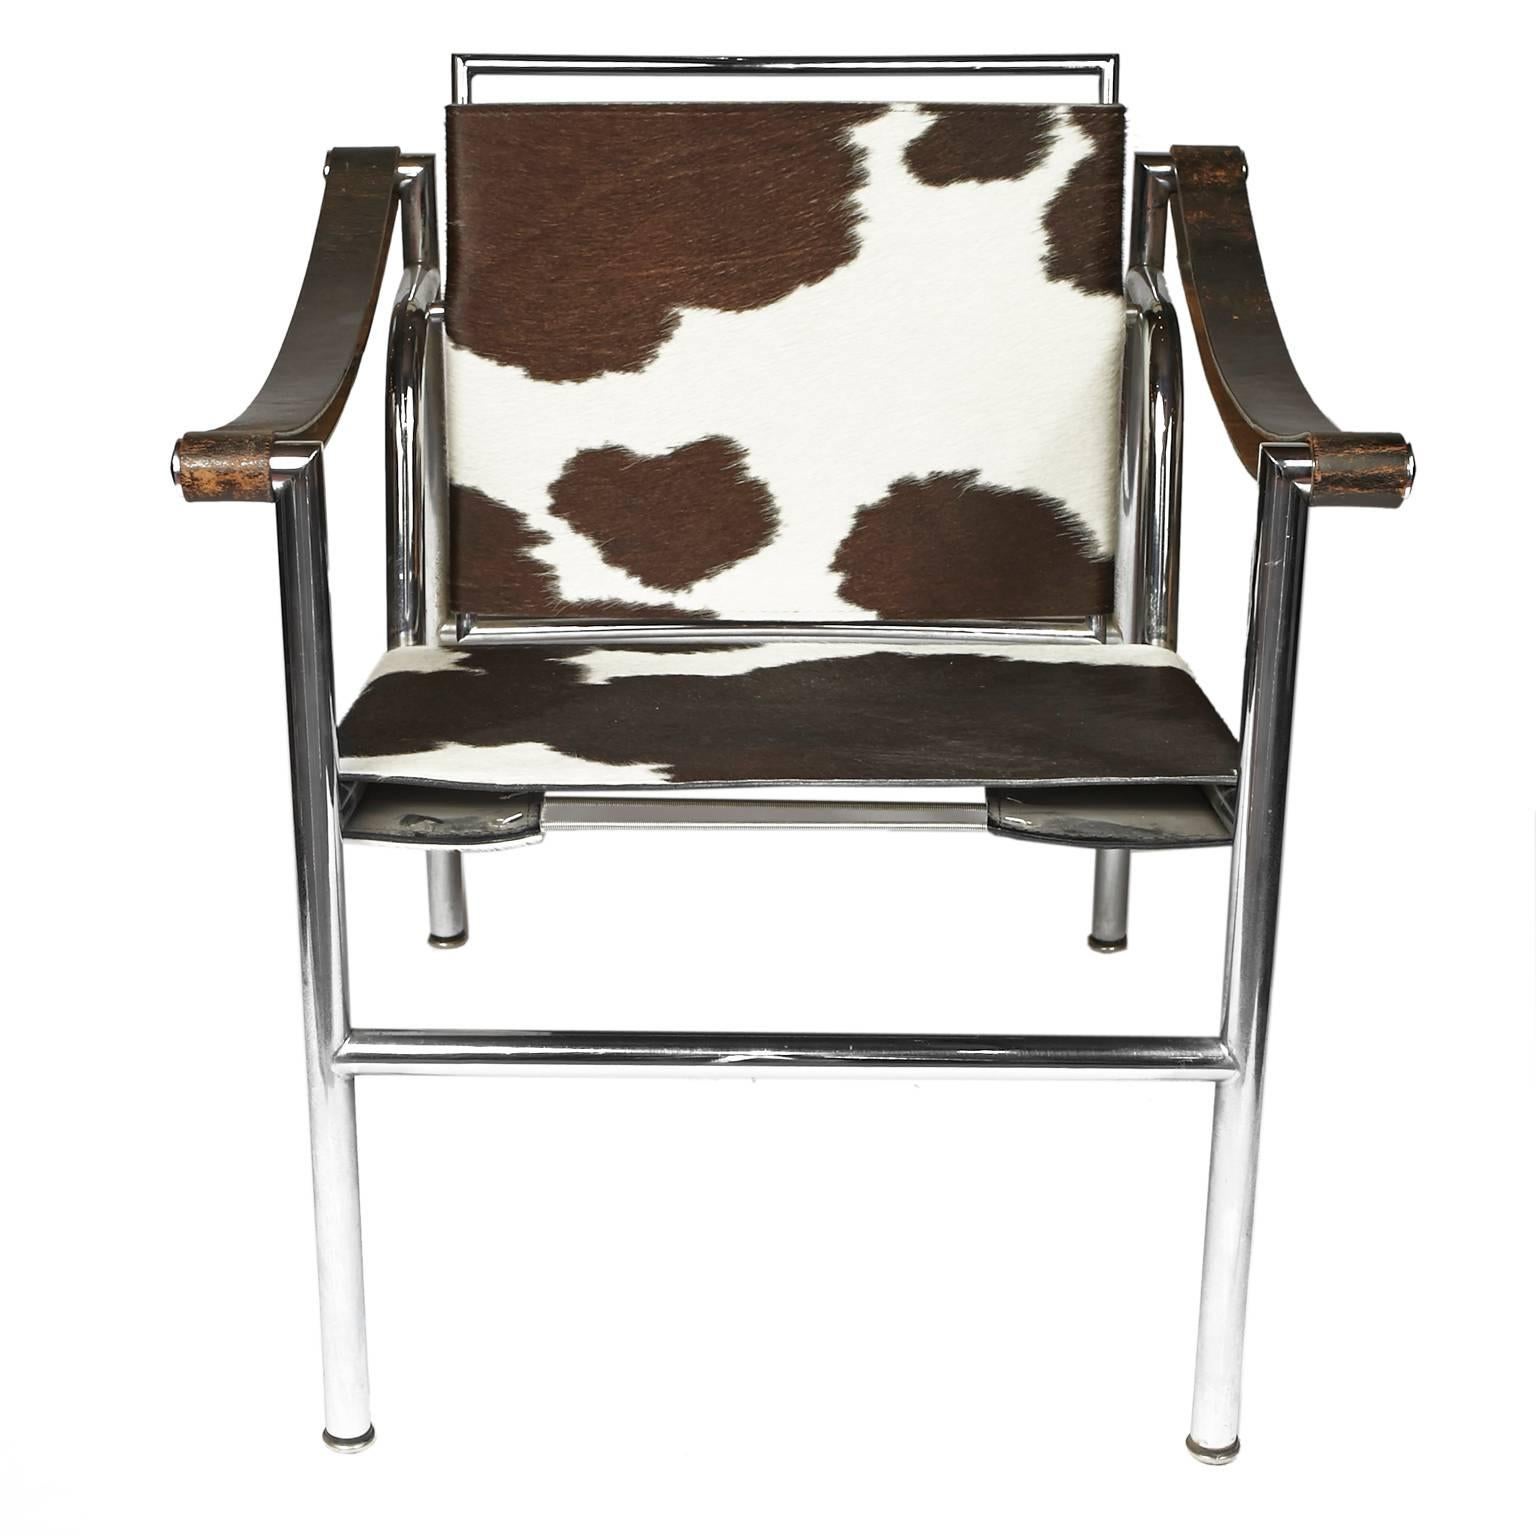 Le Corbusier LC1 cow hide sling chairs. Good vintage condition with wear to arms and some pitting to chrome. Marked on bottom Le Corbusier LC/1 0845 on one chair and Le Corbusier LC/10849 on the other chair. One chair is primarily black and white,